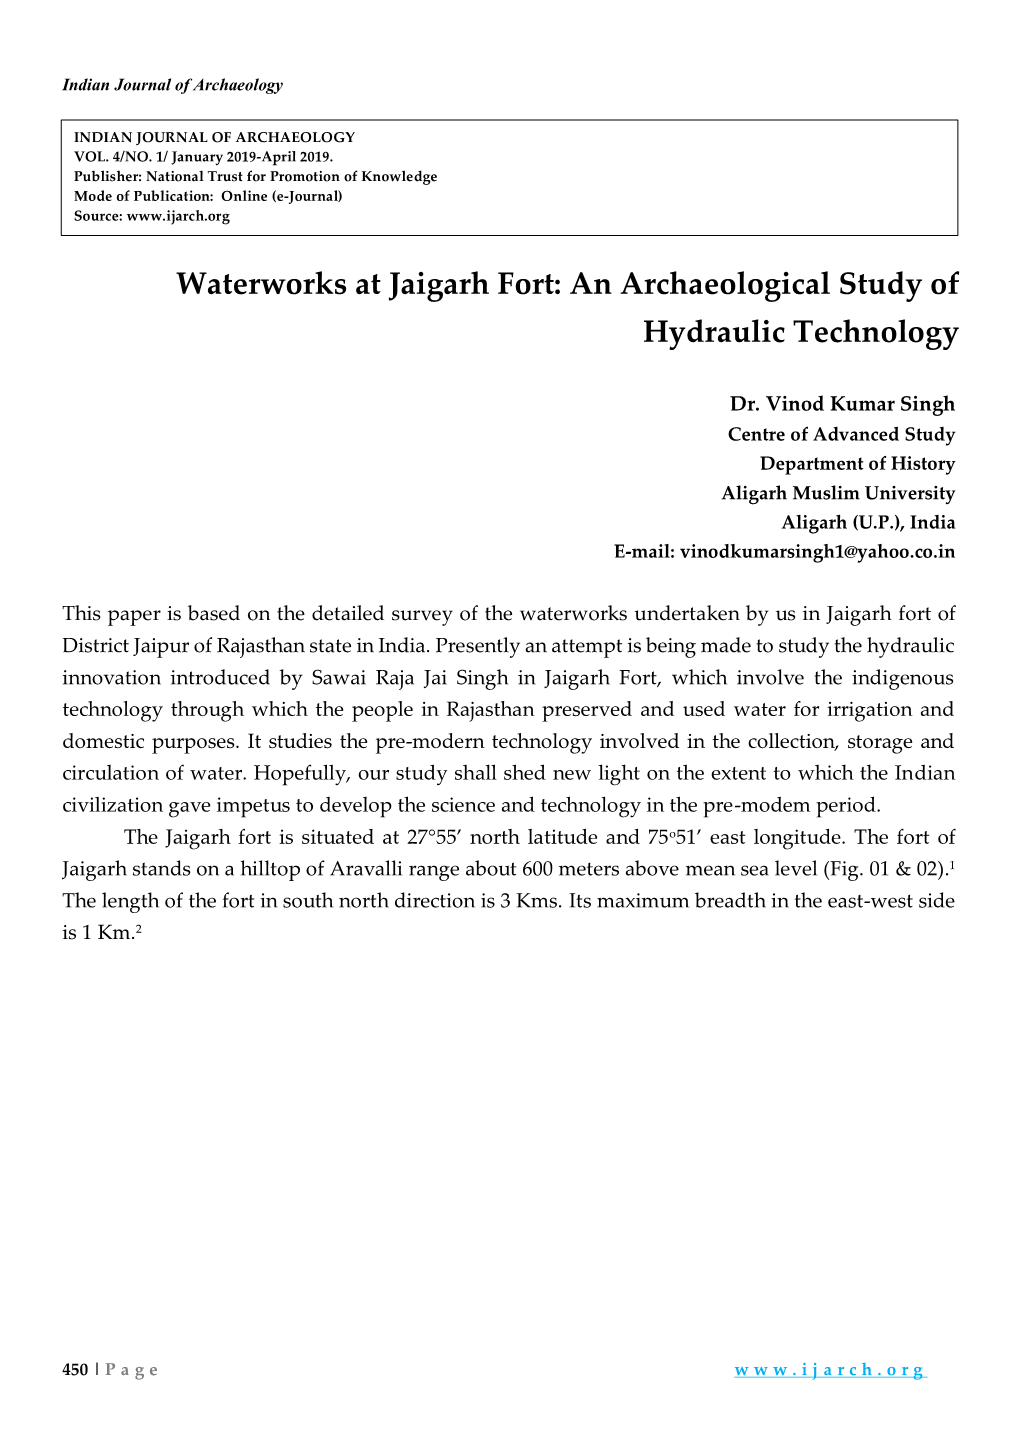 Waterworks at Jaigarh Fort: an Archaeological Study of Hydraulic Technology